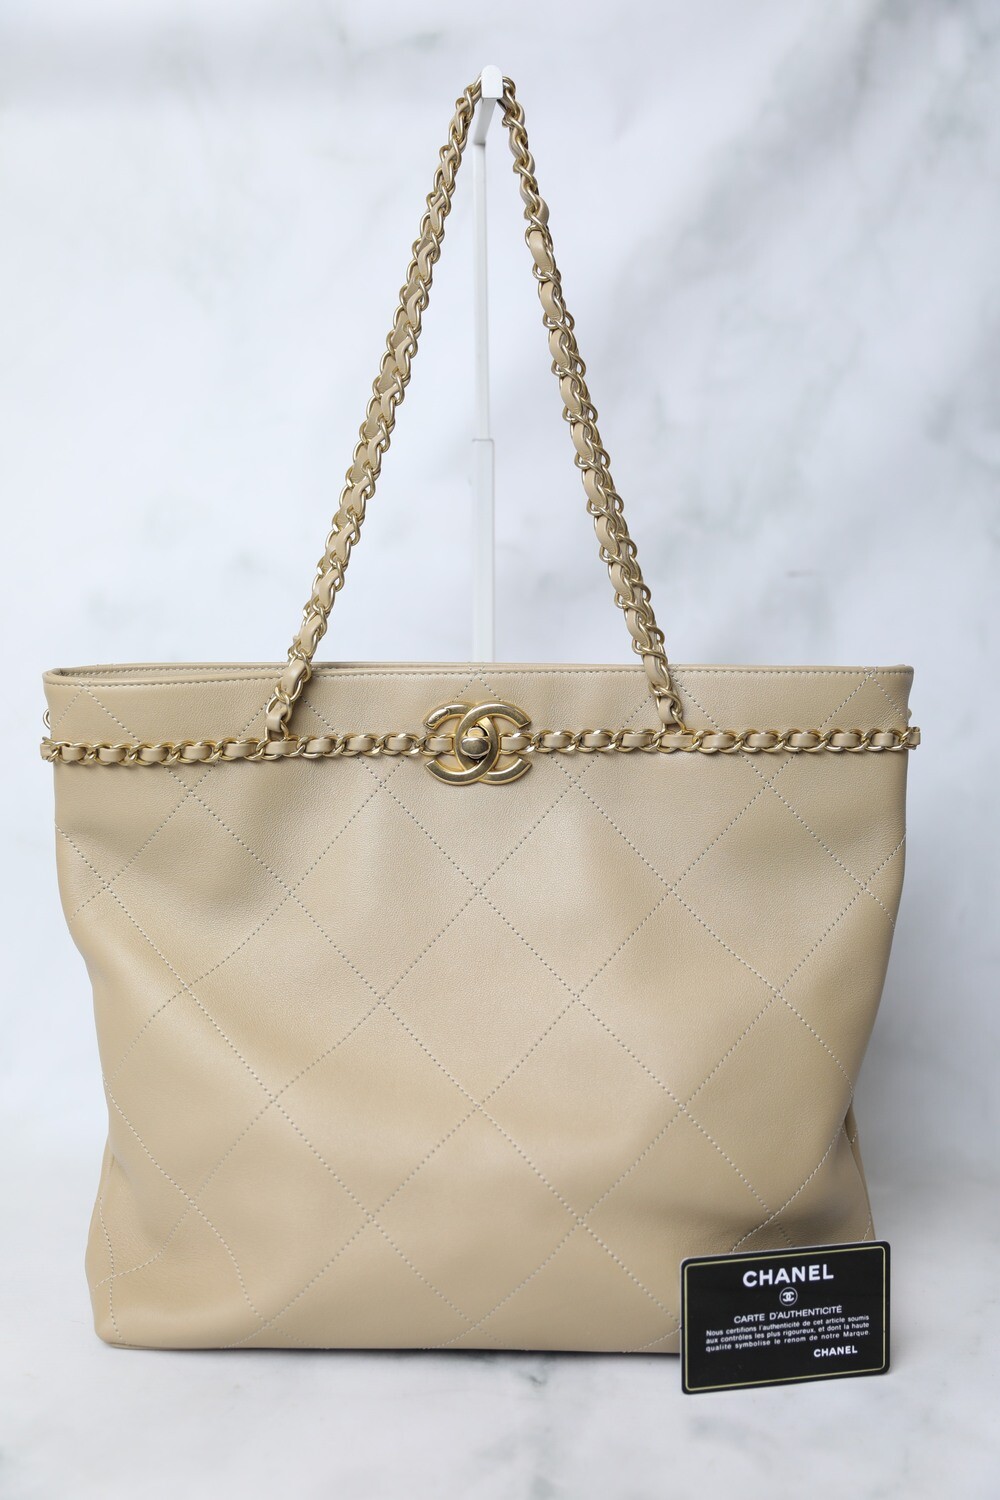 Chanel Chain Shopping Tote, Beige Calfskin with Gold Hardware, Preowned in  Box WA001 - Julia Rose Boston